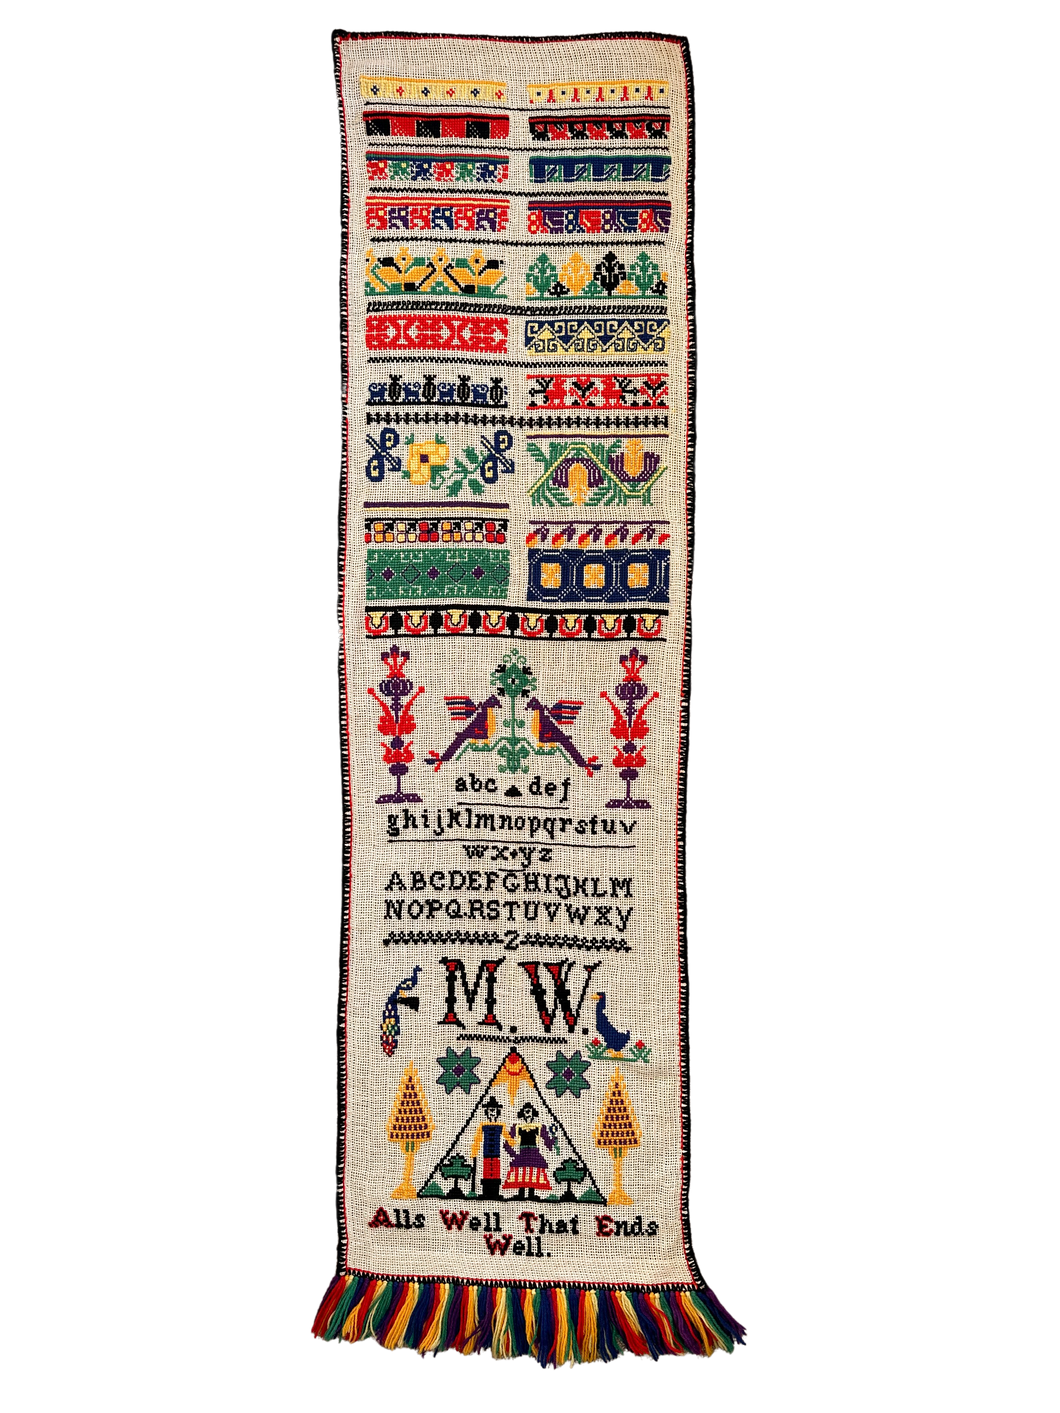 Vintage hand-woven and embroidered alphabet wall-hanging tapestry in rainbow colours - Moppet